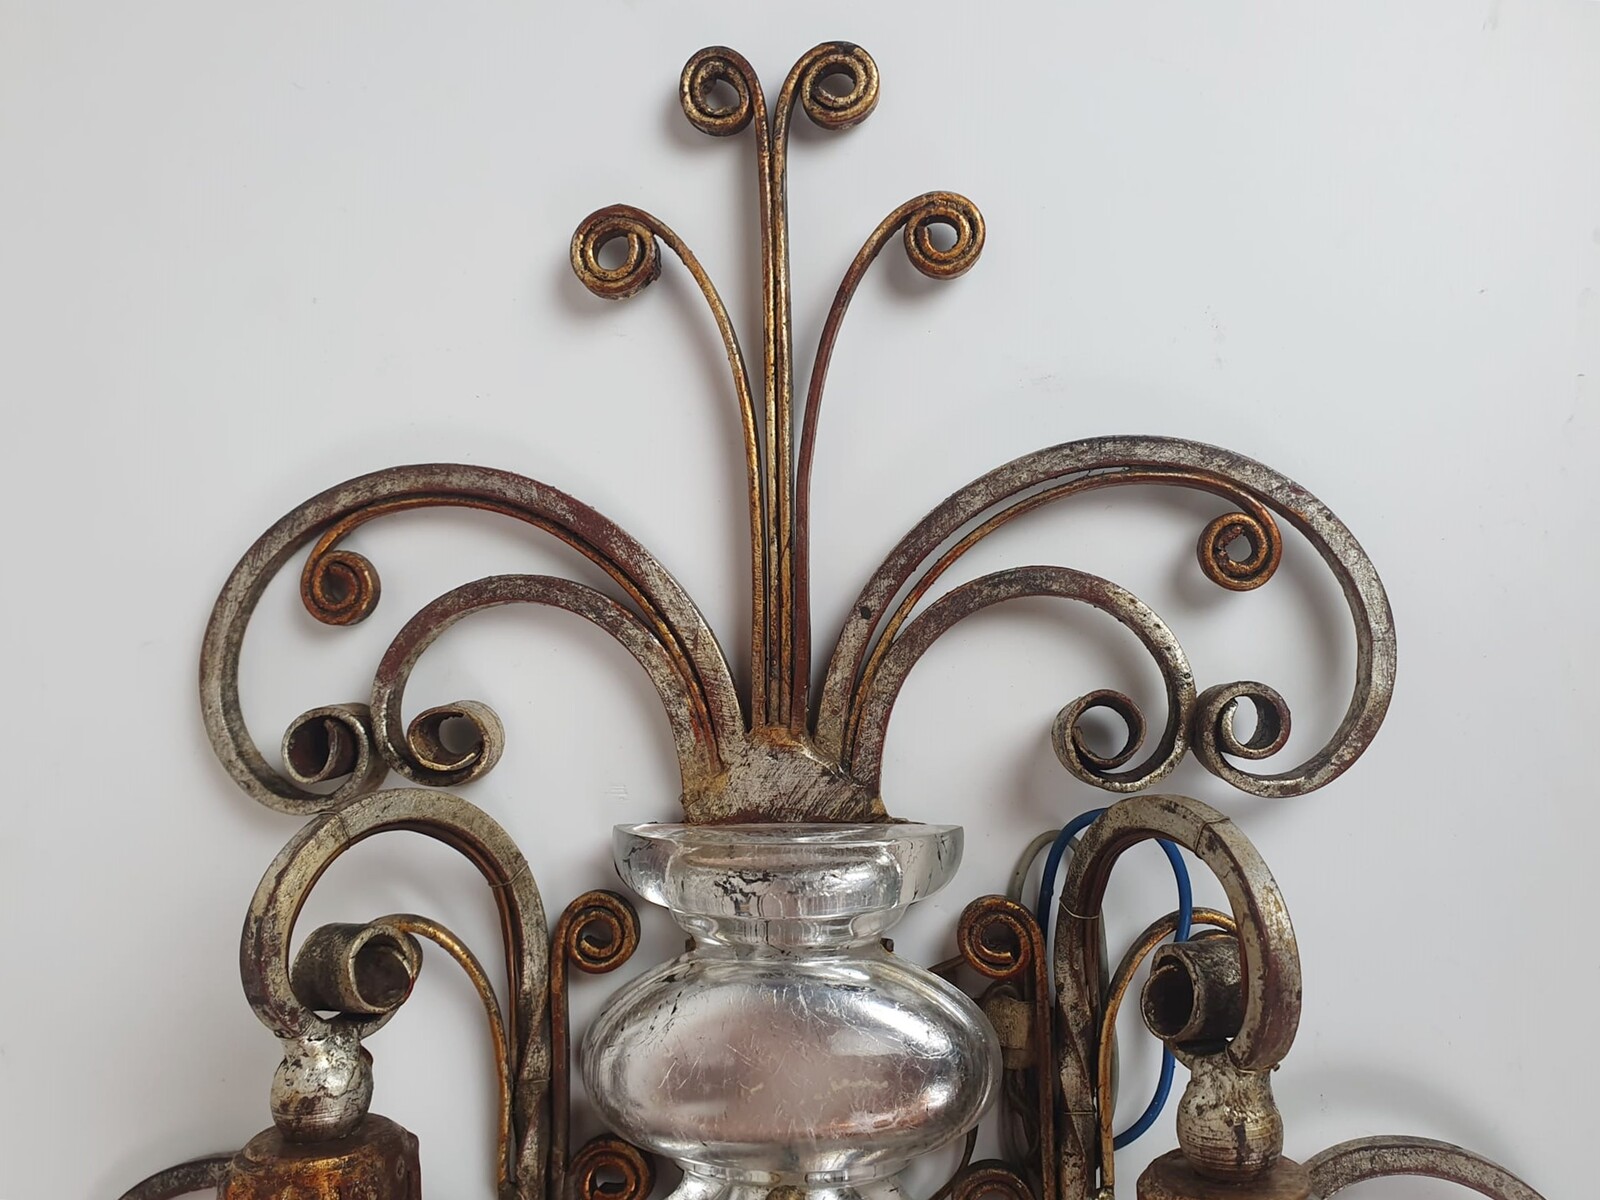 BANCHI, pair of silver wrought iron and glass wall lights, Italy circa 1940